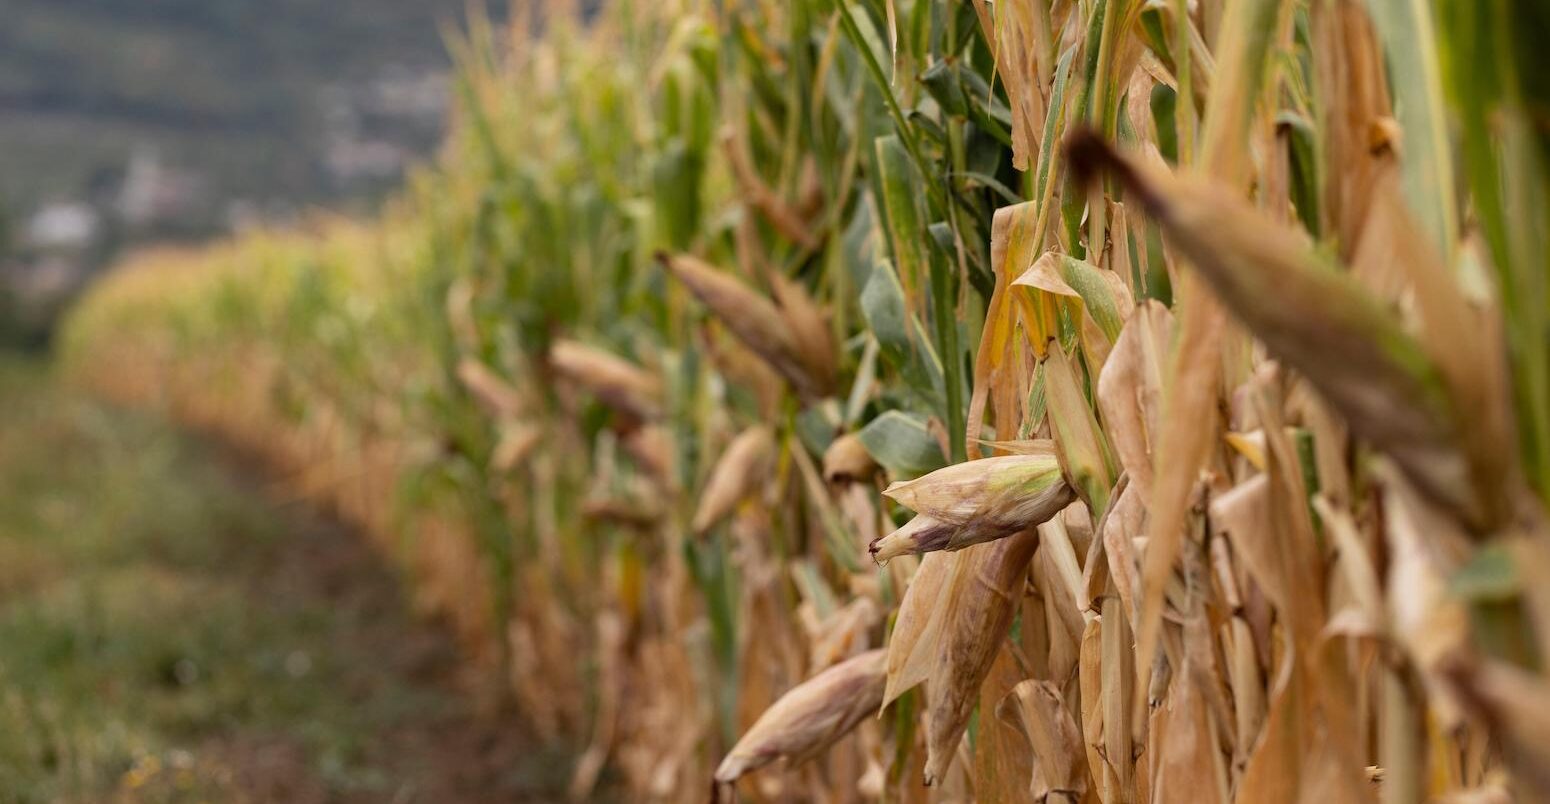 Withered corn crops are seen at Vipava valley in Nova Gorica, Slovenia, on 16 August 2022.